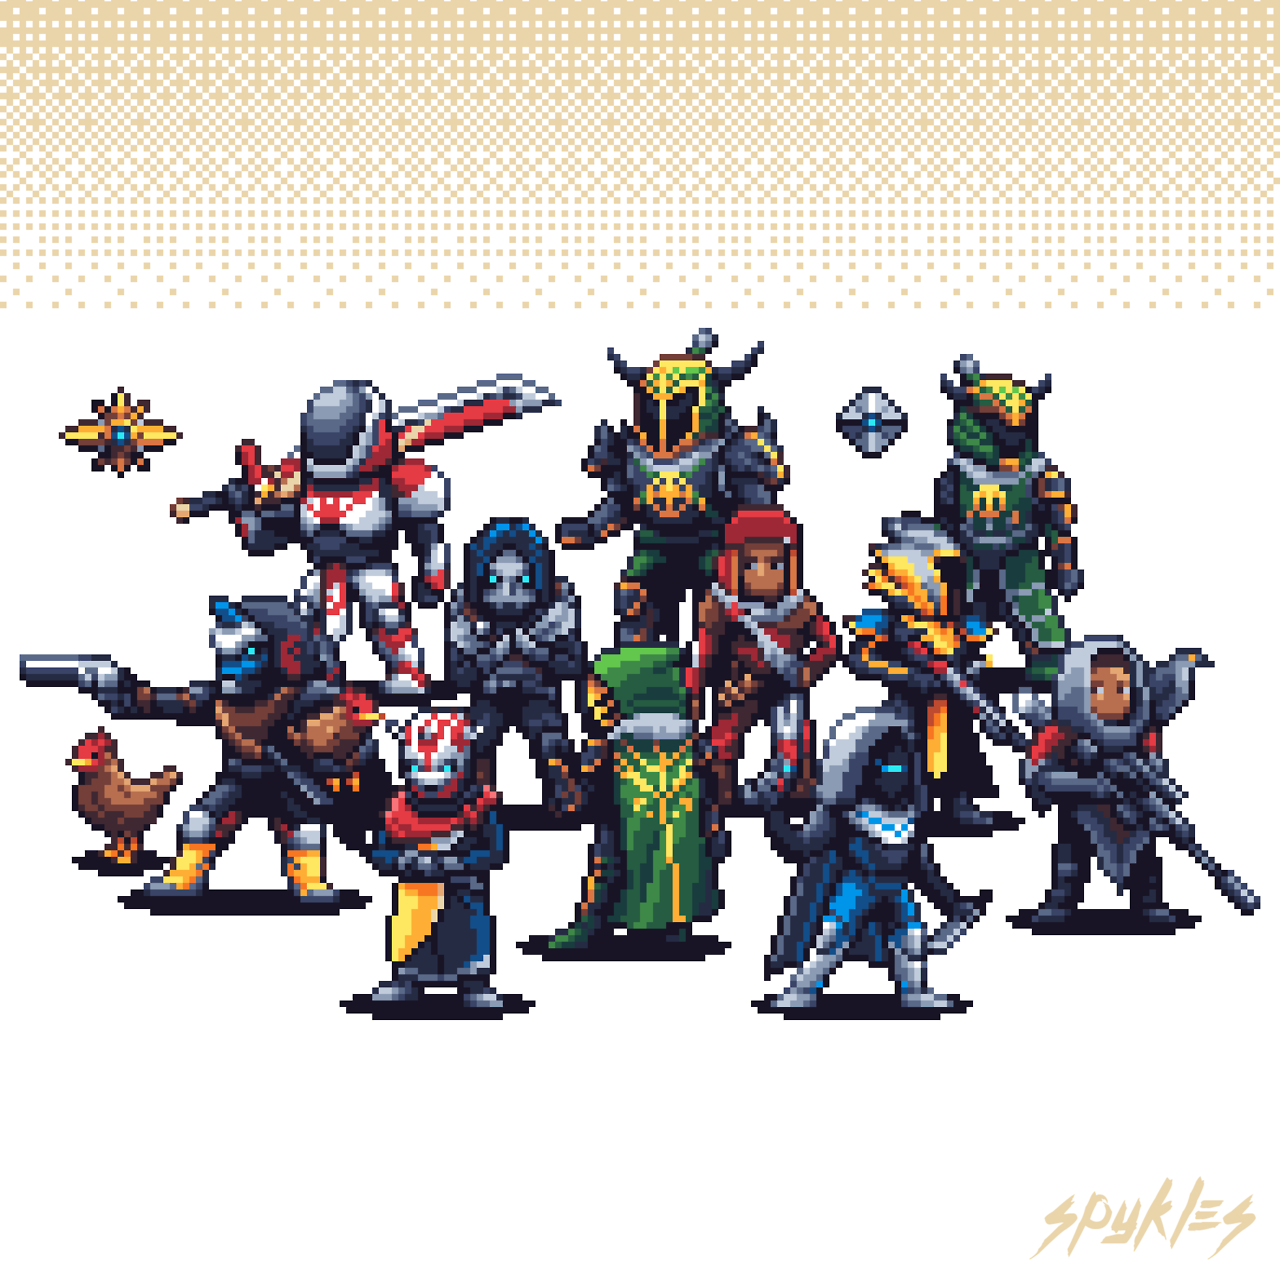 Conquer Your Fears... — spykles: All my Destiny 2 Pixel Art characters...